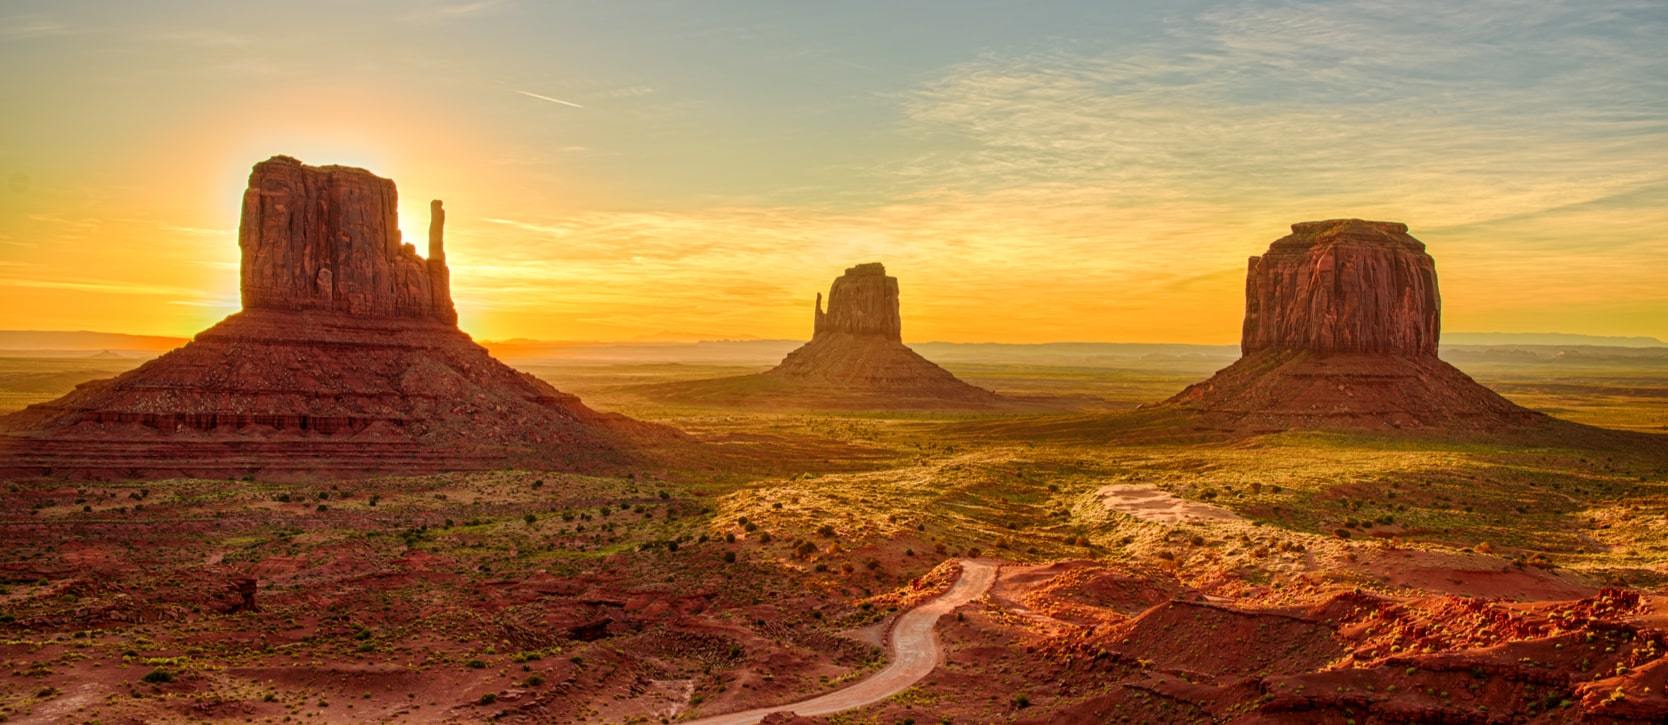 Gorgeous Monument Valley Navajo Tribal Park during sunrise